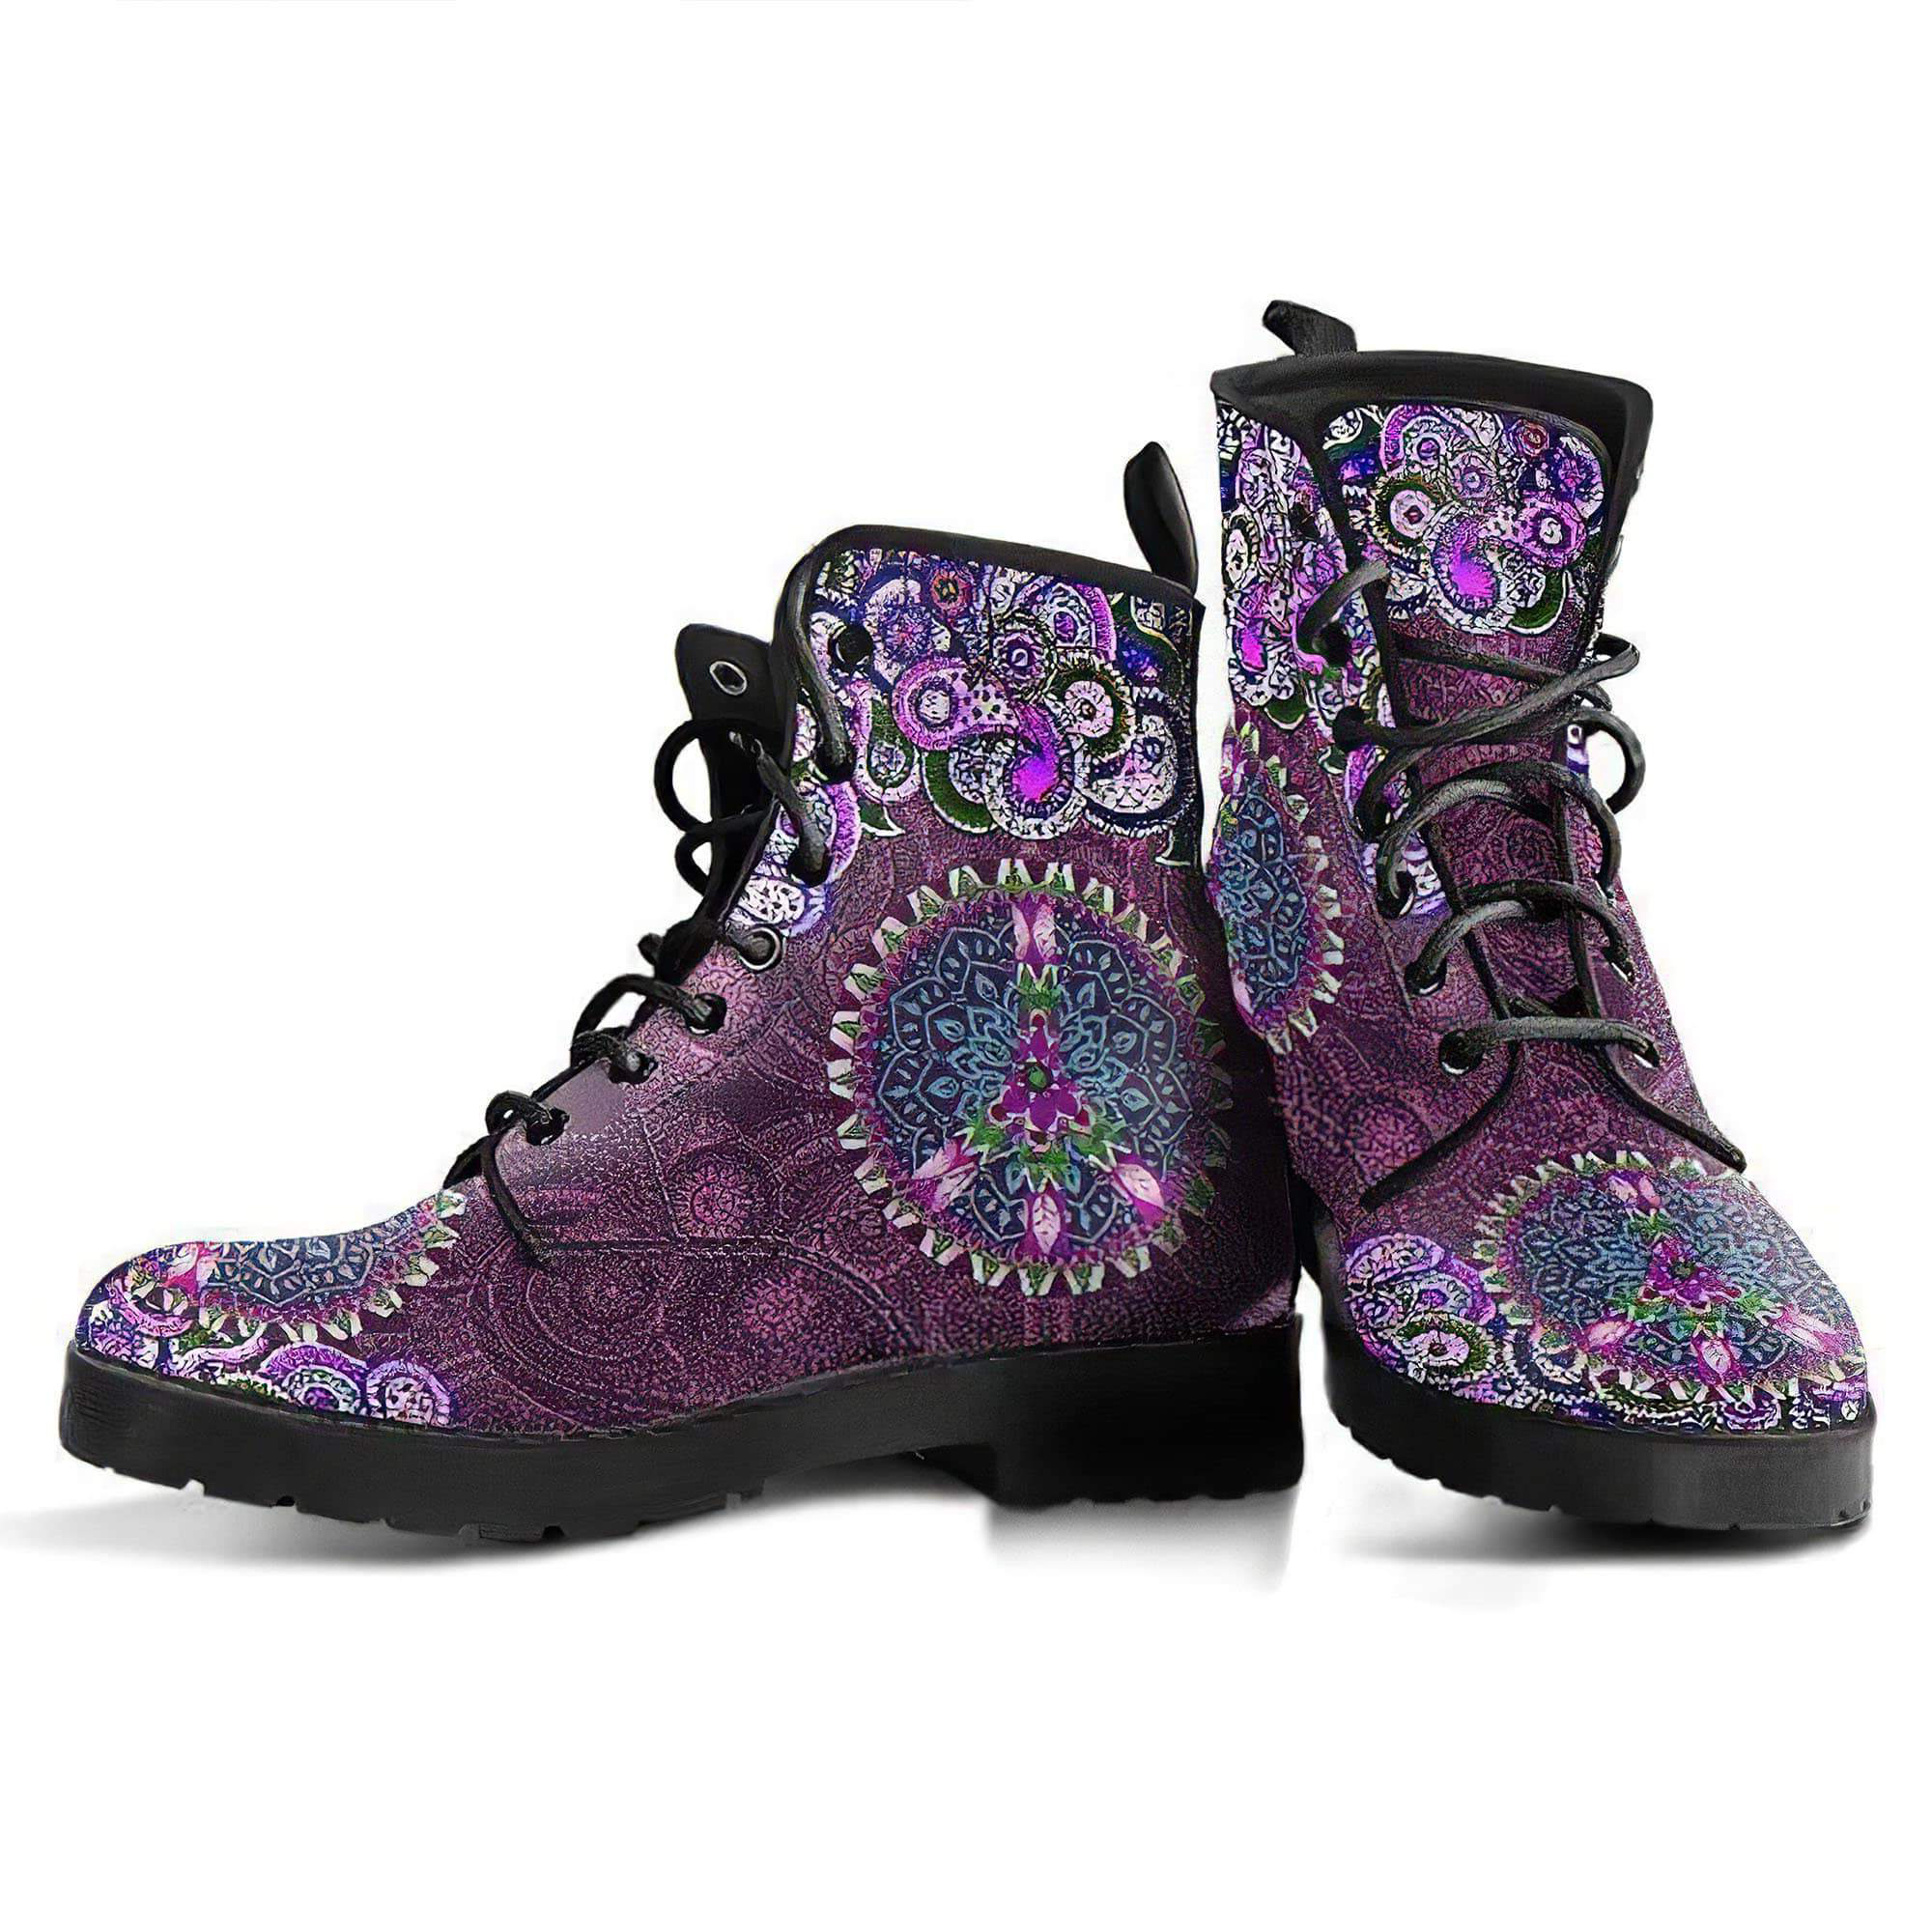 purple-peace-mandala-handcrafted-boots-women-s-leather-boots-12051939688509.jpg